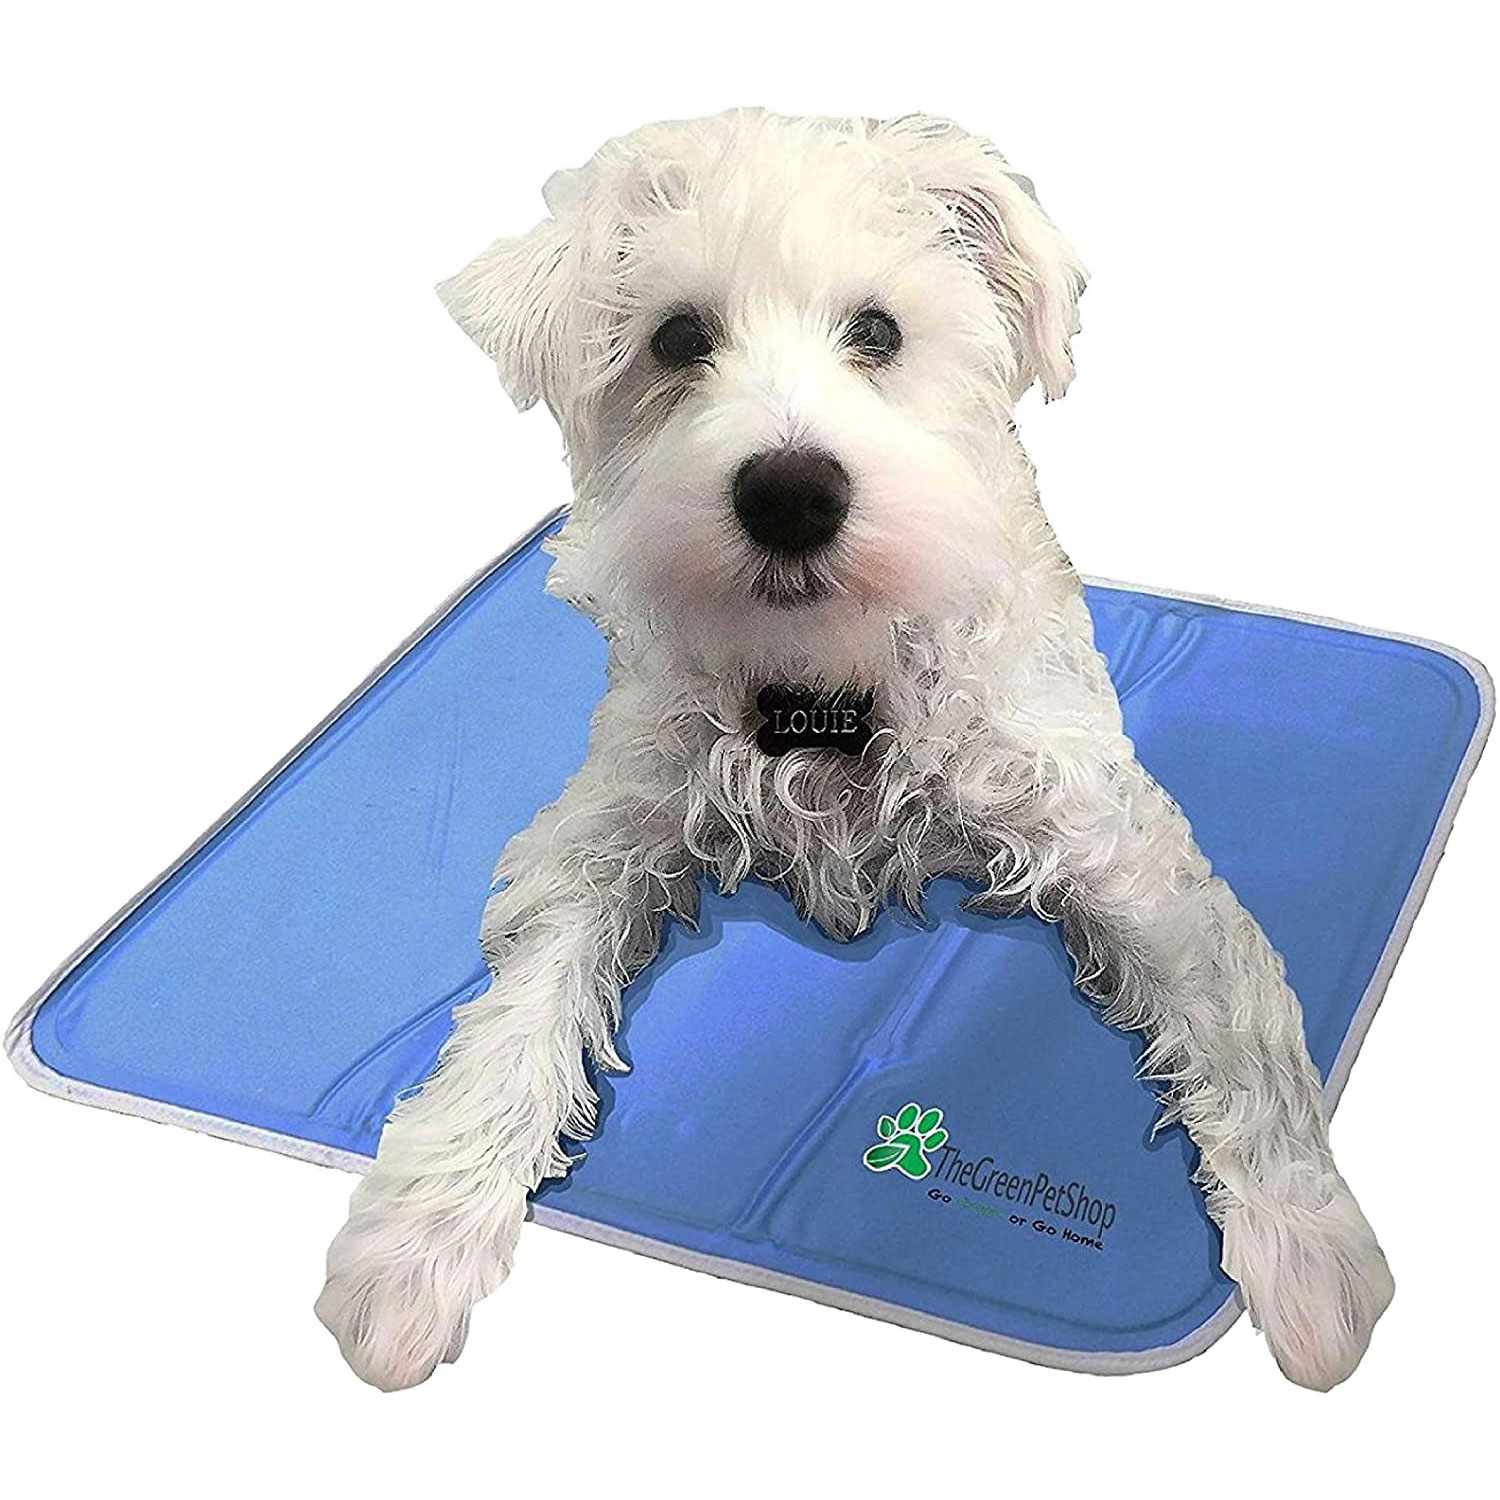 Keep Your Dog Cool and Reduce Joint Pain Glumes Dog Cooling Mat Machine Washable Pet Cats Dogs Cooling Pad Activated Gel Extra Large Cooling Pad for Dogs & Pets Dog Accessories No Need To Freeze Or Chill L